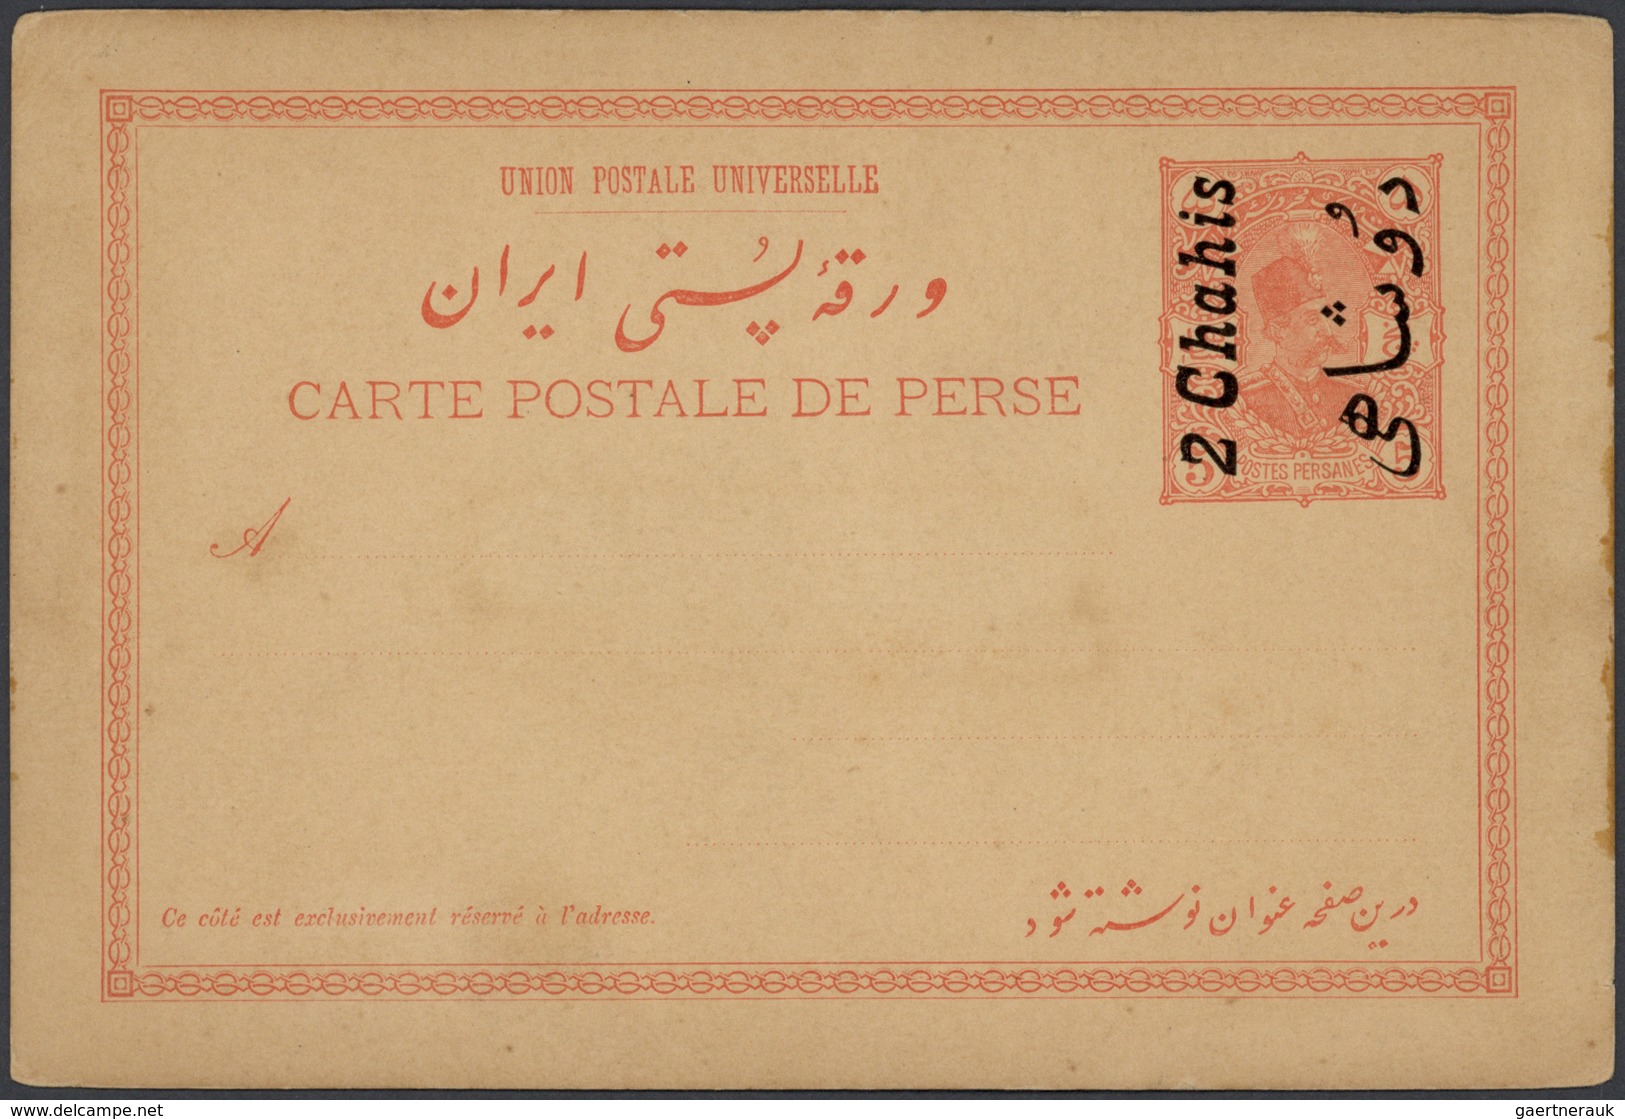 22817 Iran: 1900-30, Collection of 170 postal stationerys mint and used with internal and abroad usage, up